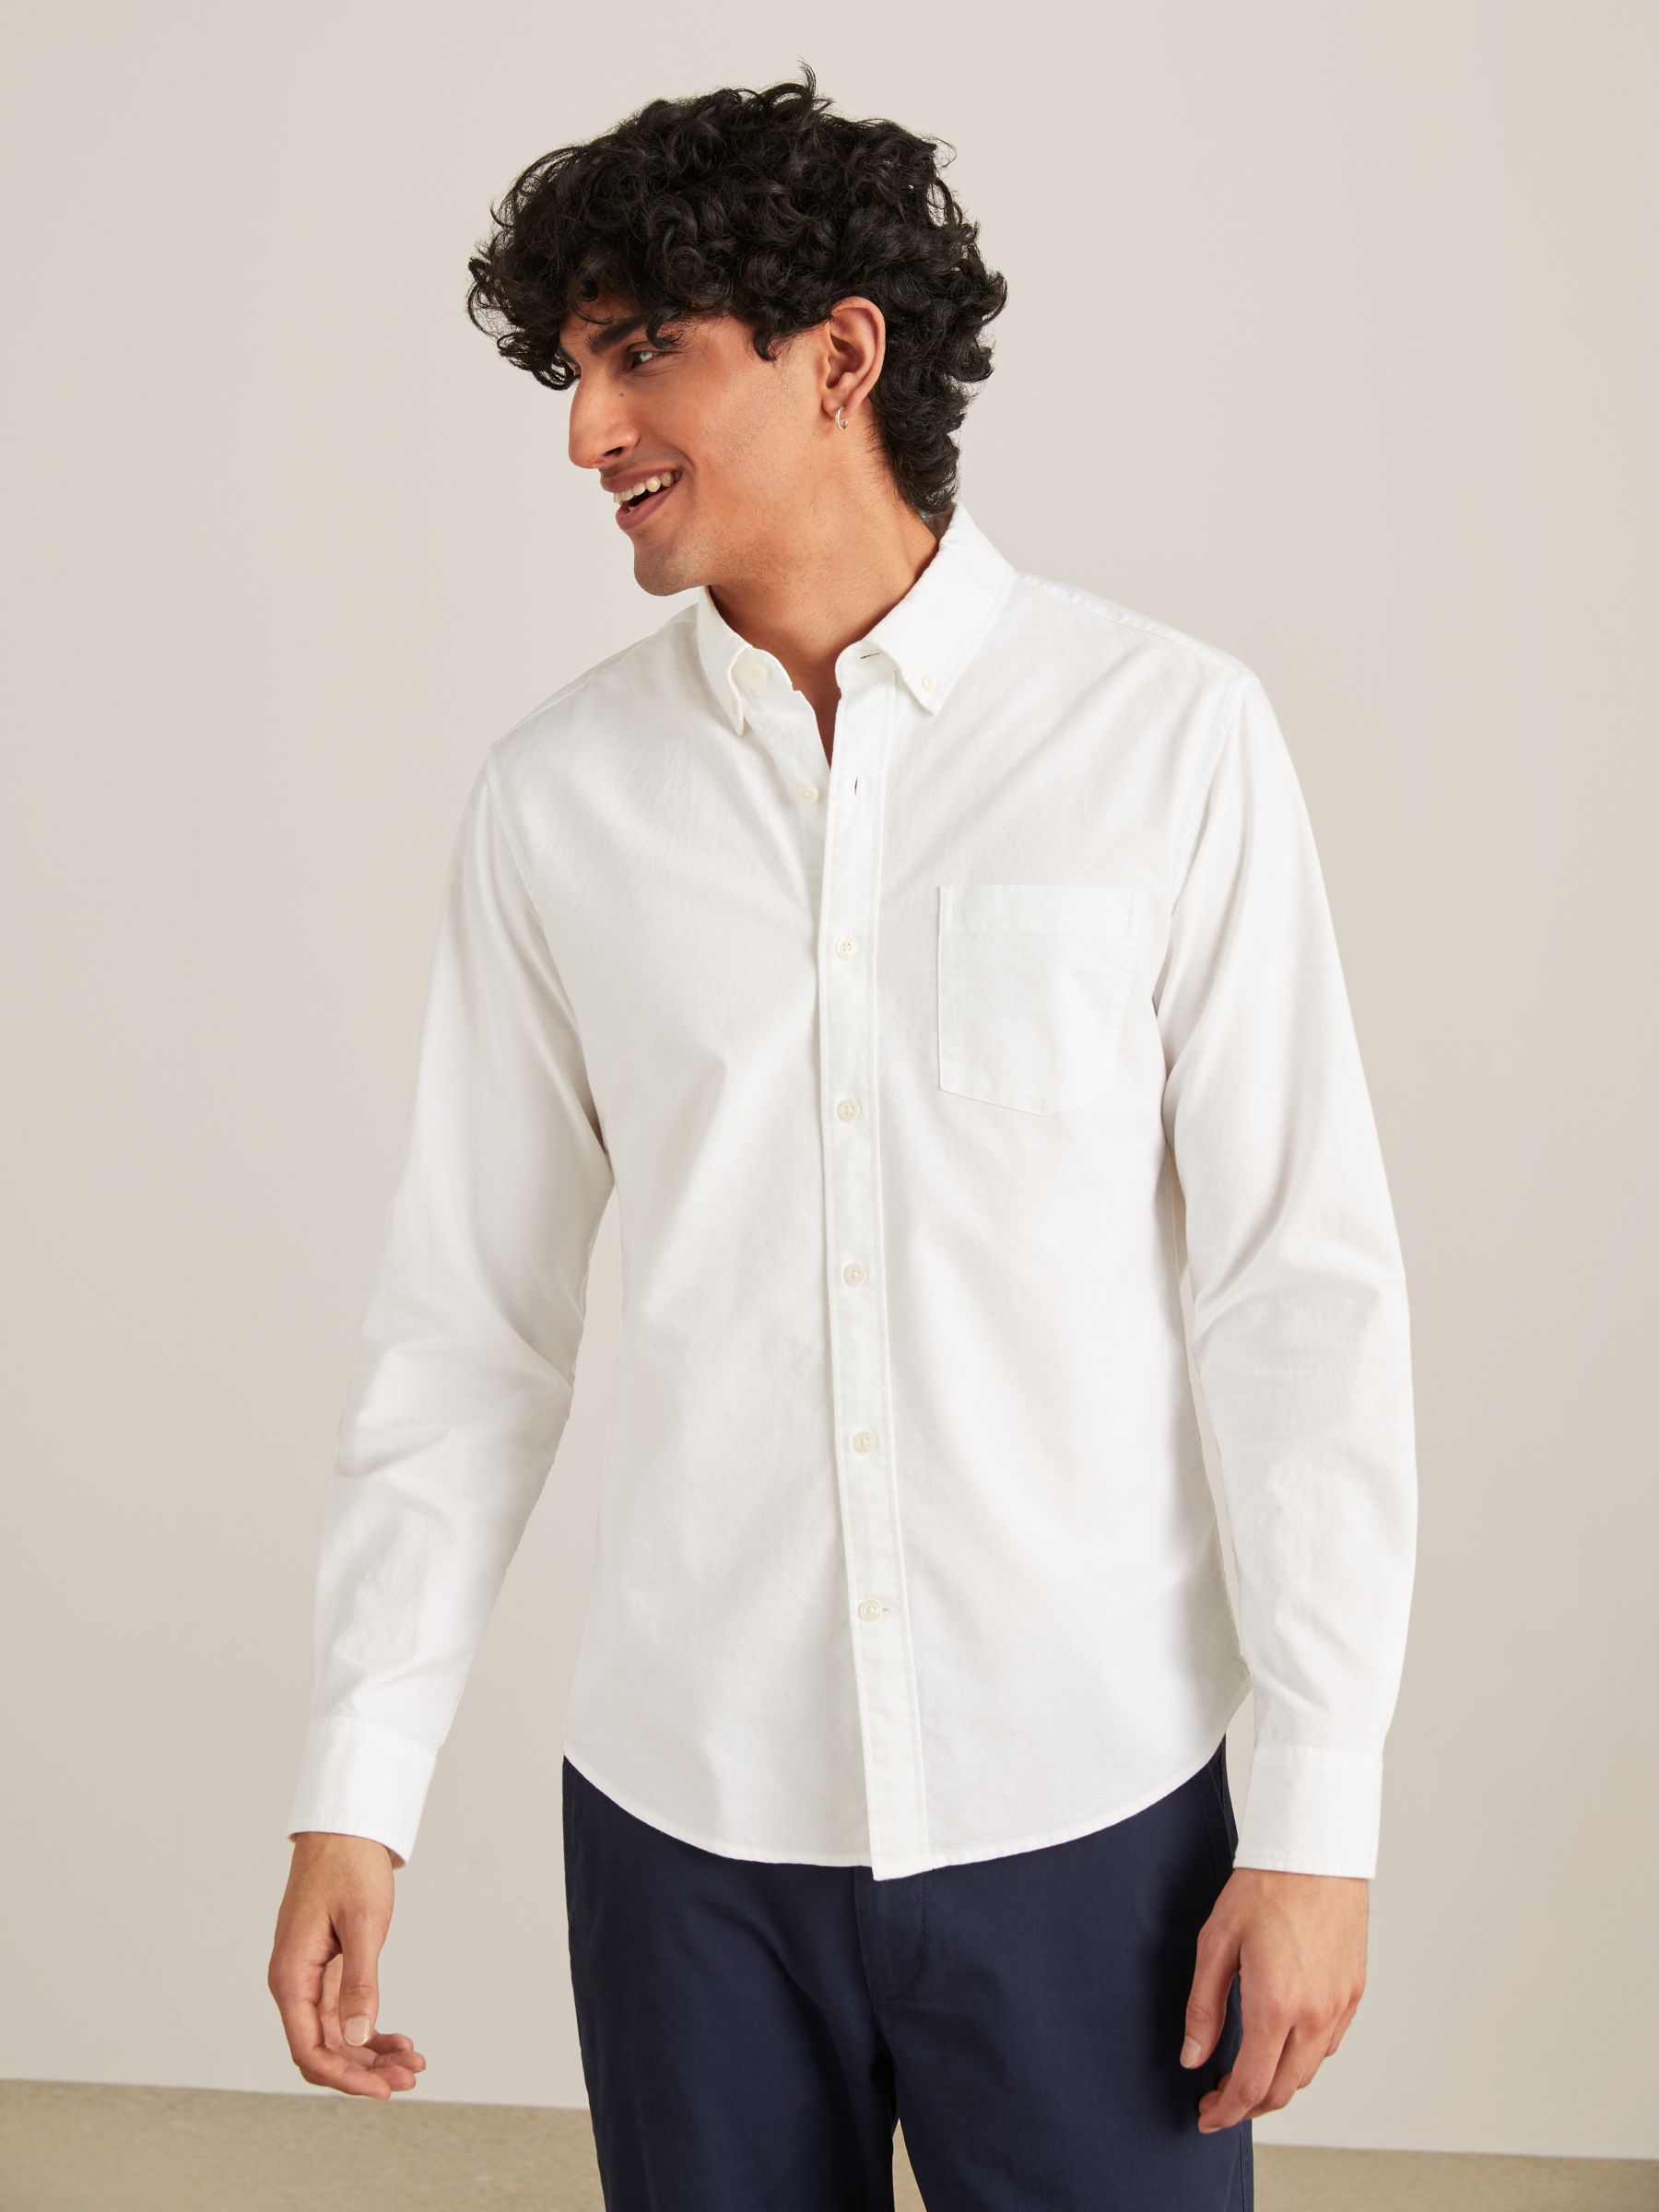 Trendy and Organic branded white shirts for men for All Seasons